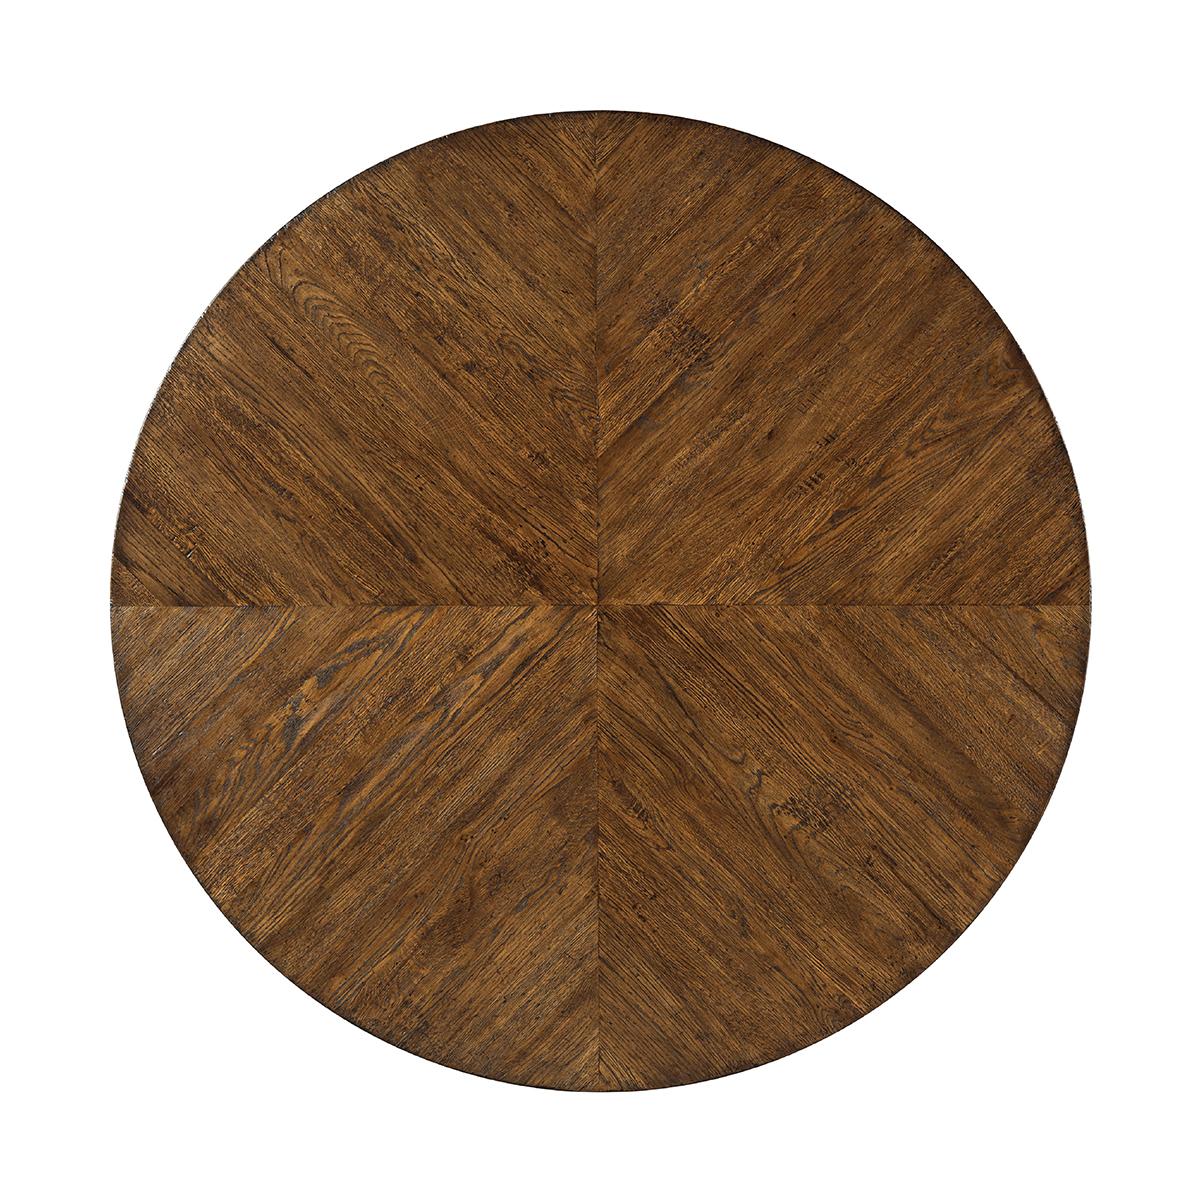 A modern rustic oak parquetry round dining table with tapered legs. The beautiful table has a radial design oak top with a flat truss and reinforcing oak stretcher. 
Shown in Dusk Finish
Dimensions: 48